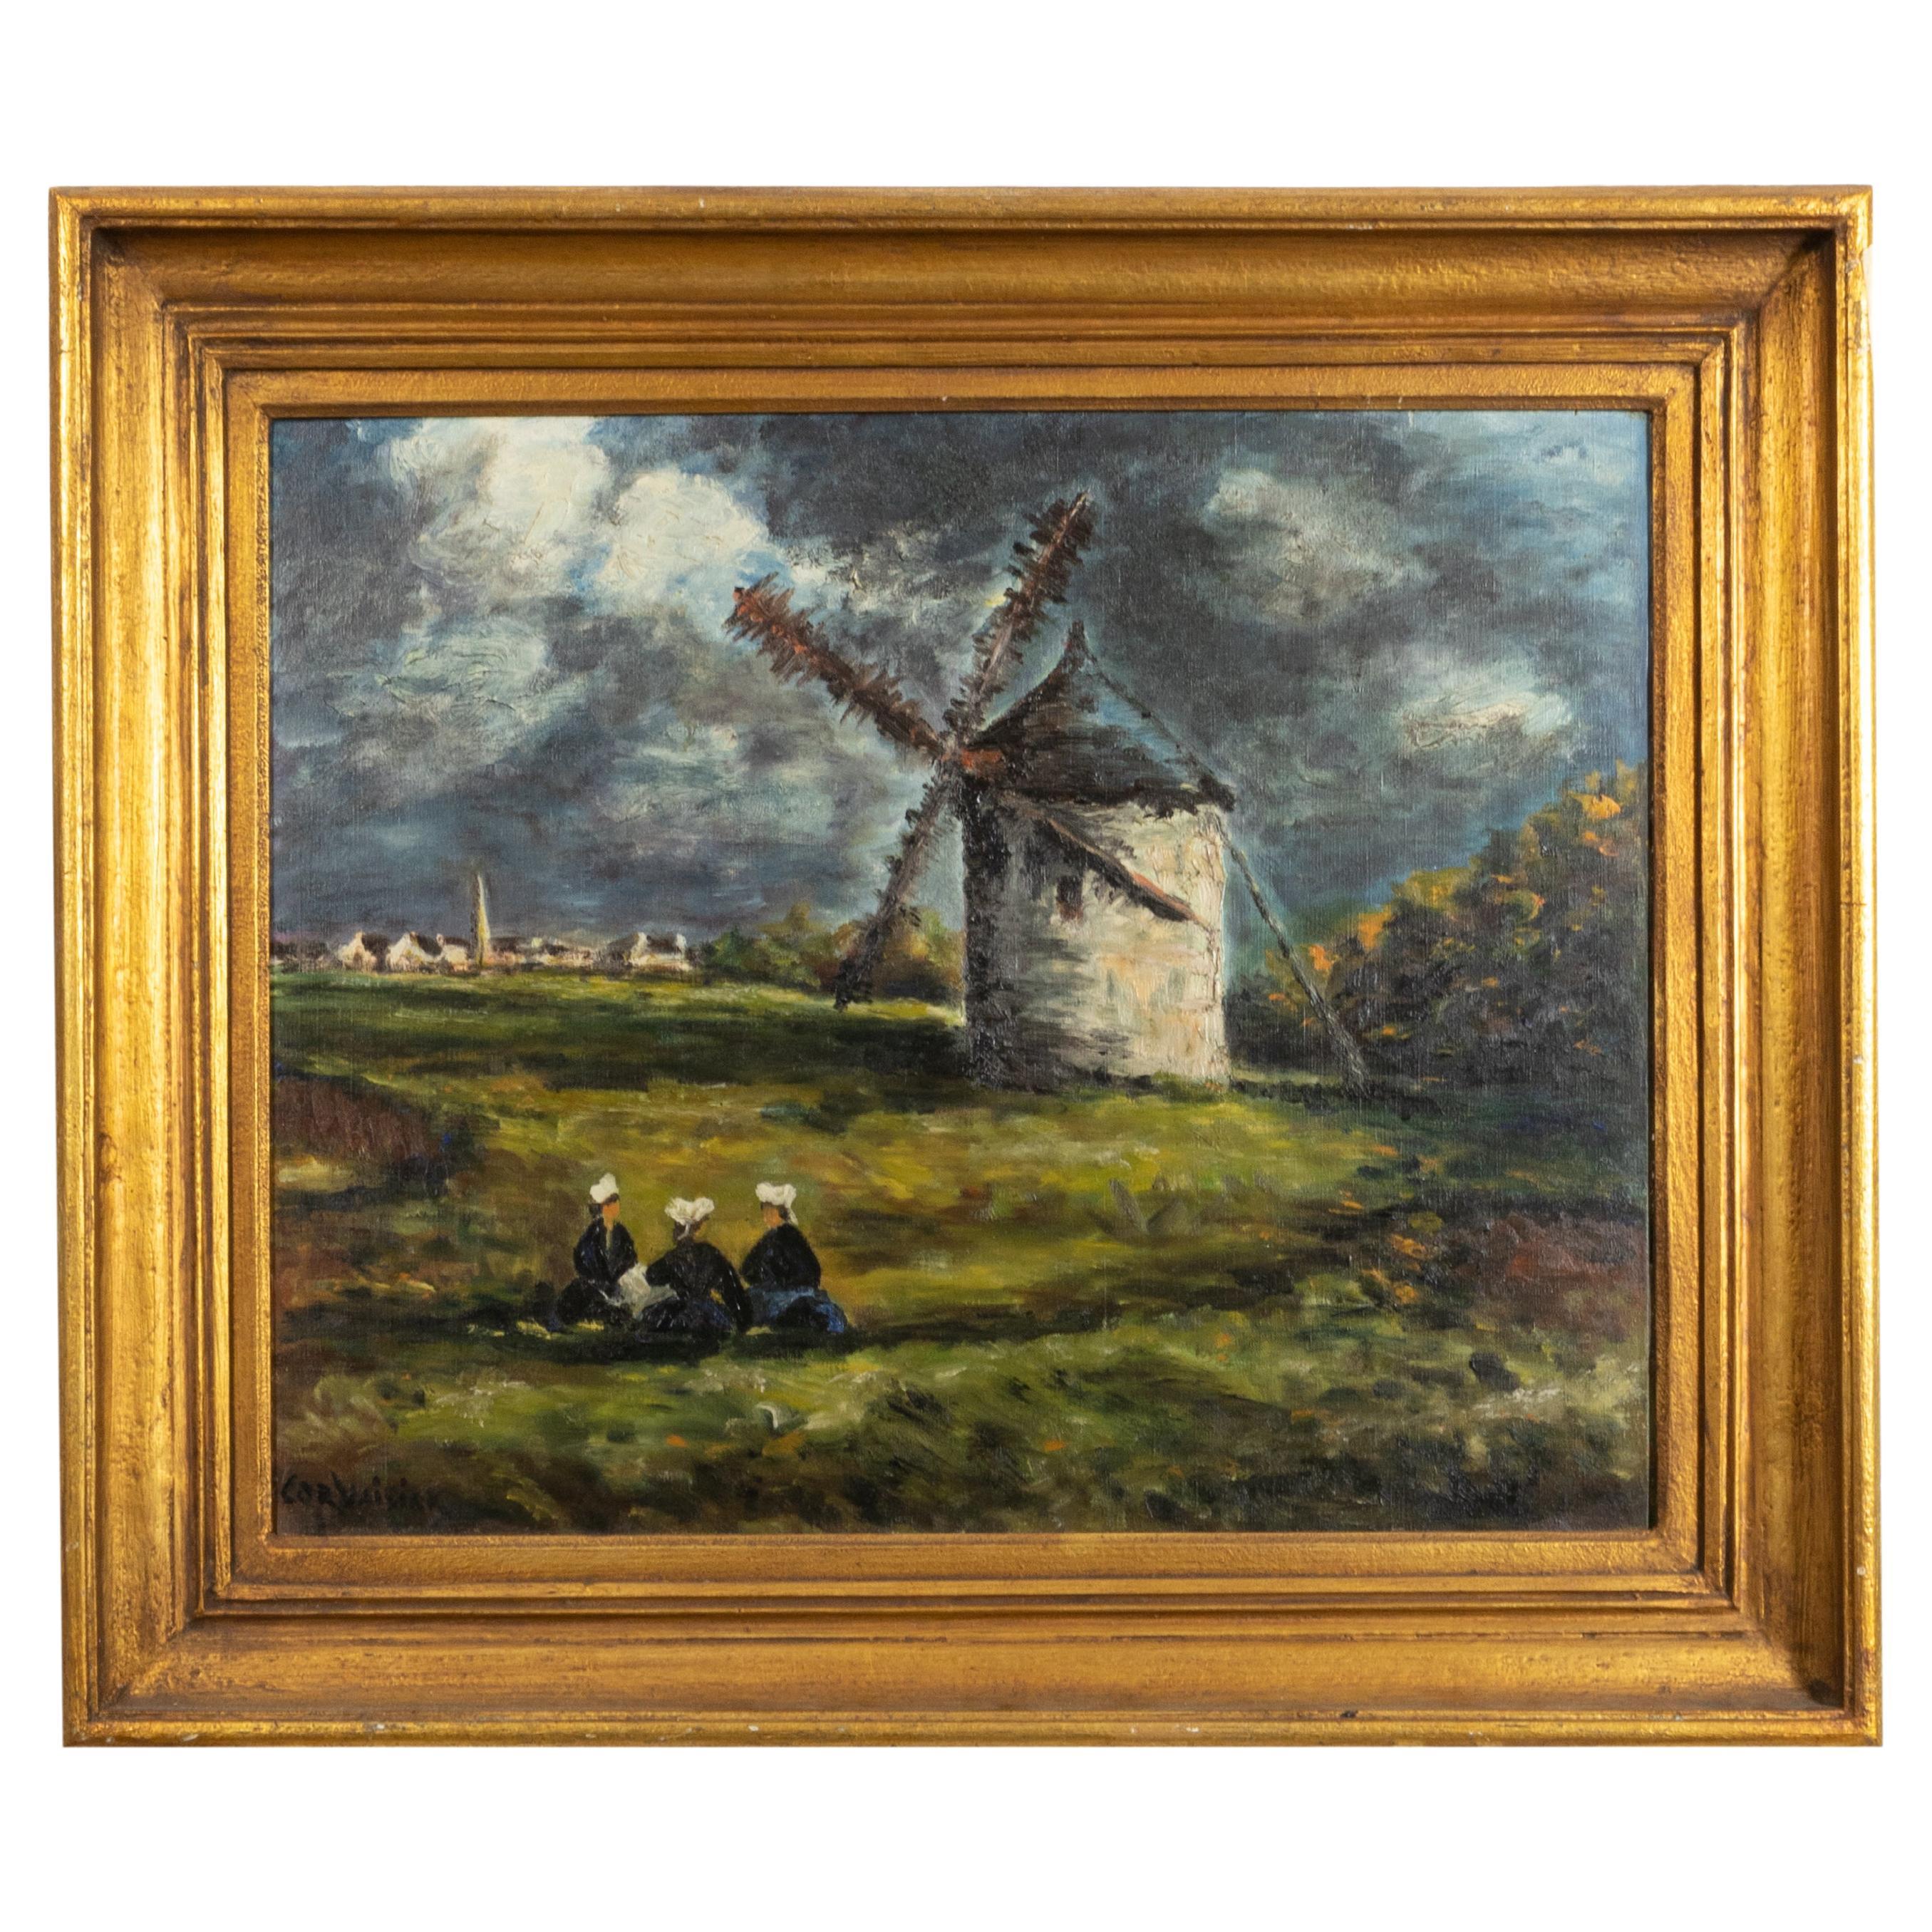 Barbizon School Period French Painting, 19th Century By "Corvoisier" For Sale